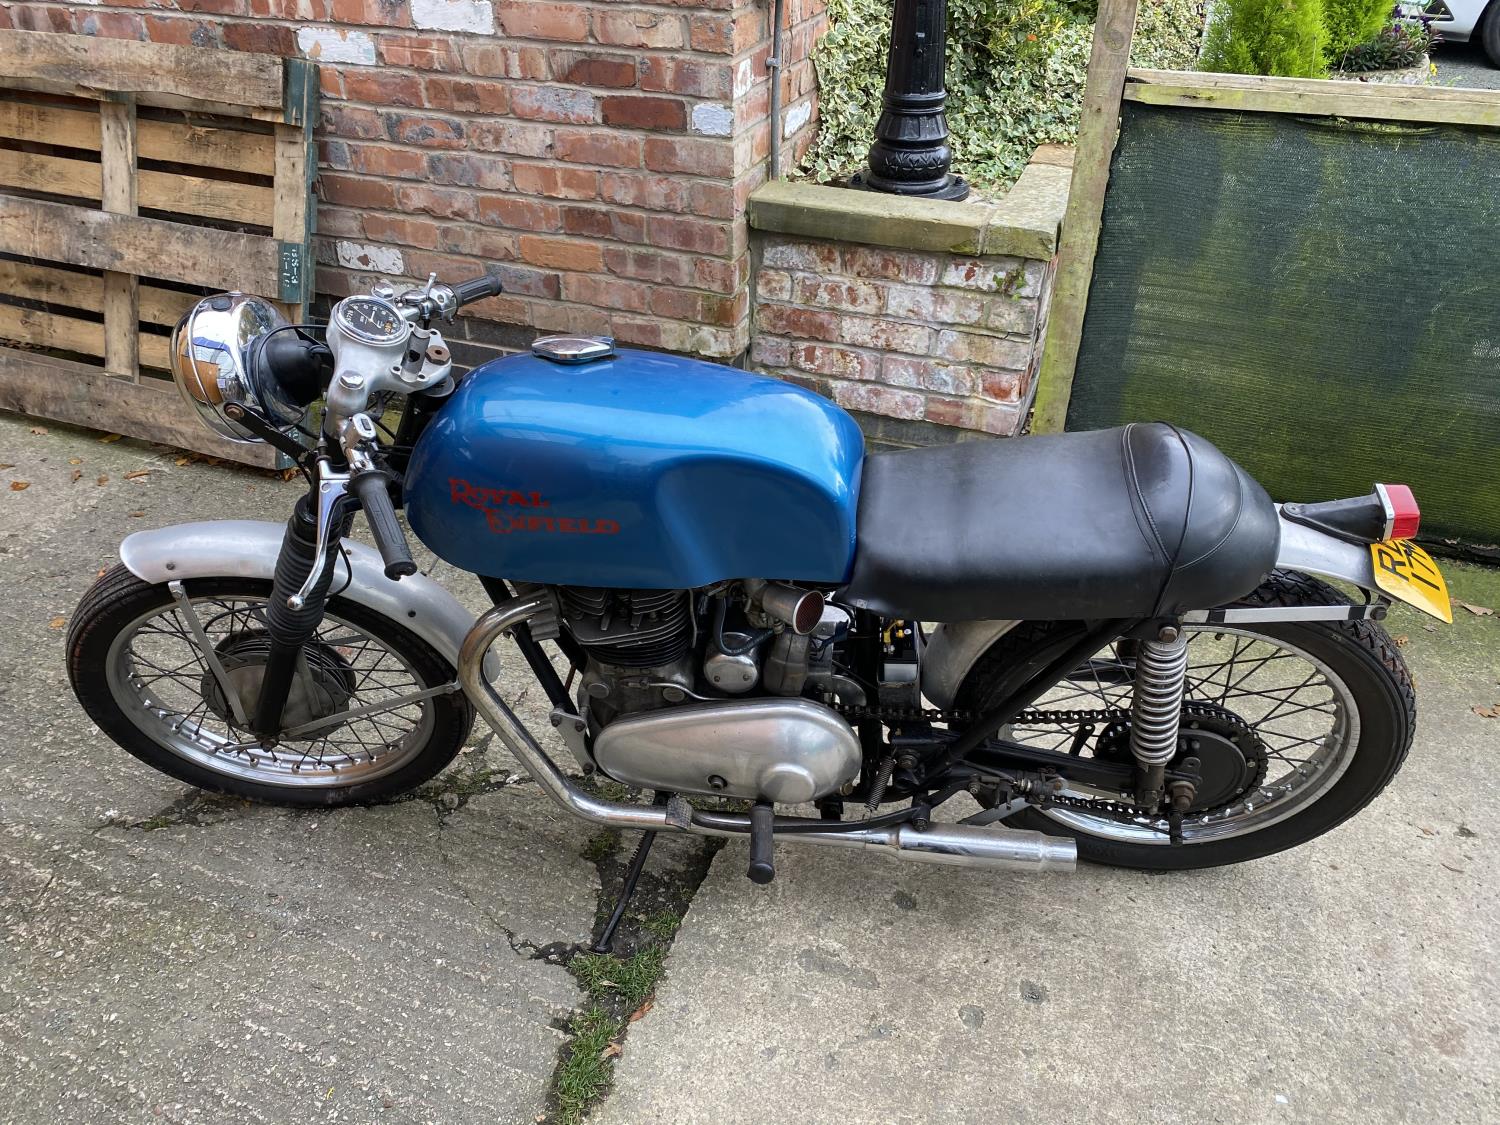 A ROYAL ENFIELD 700 CC TWIN CYLINDER MOTORCYCLE, REGISTERED IN 1974